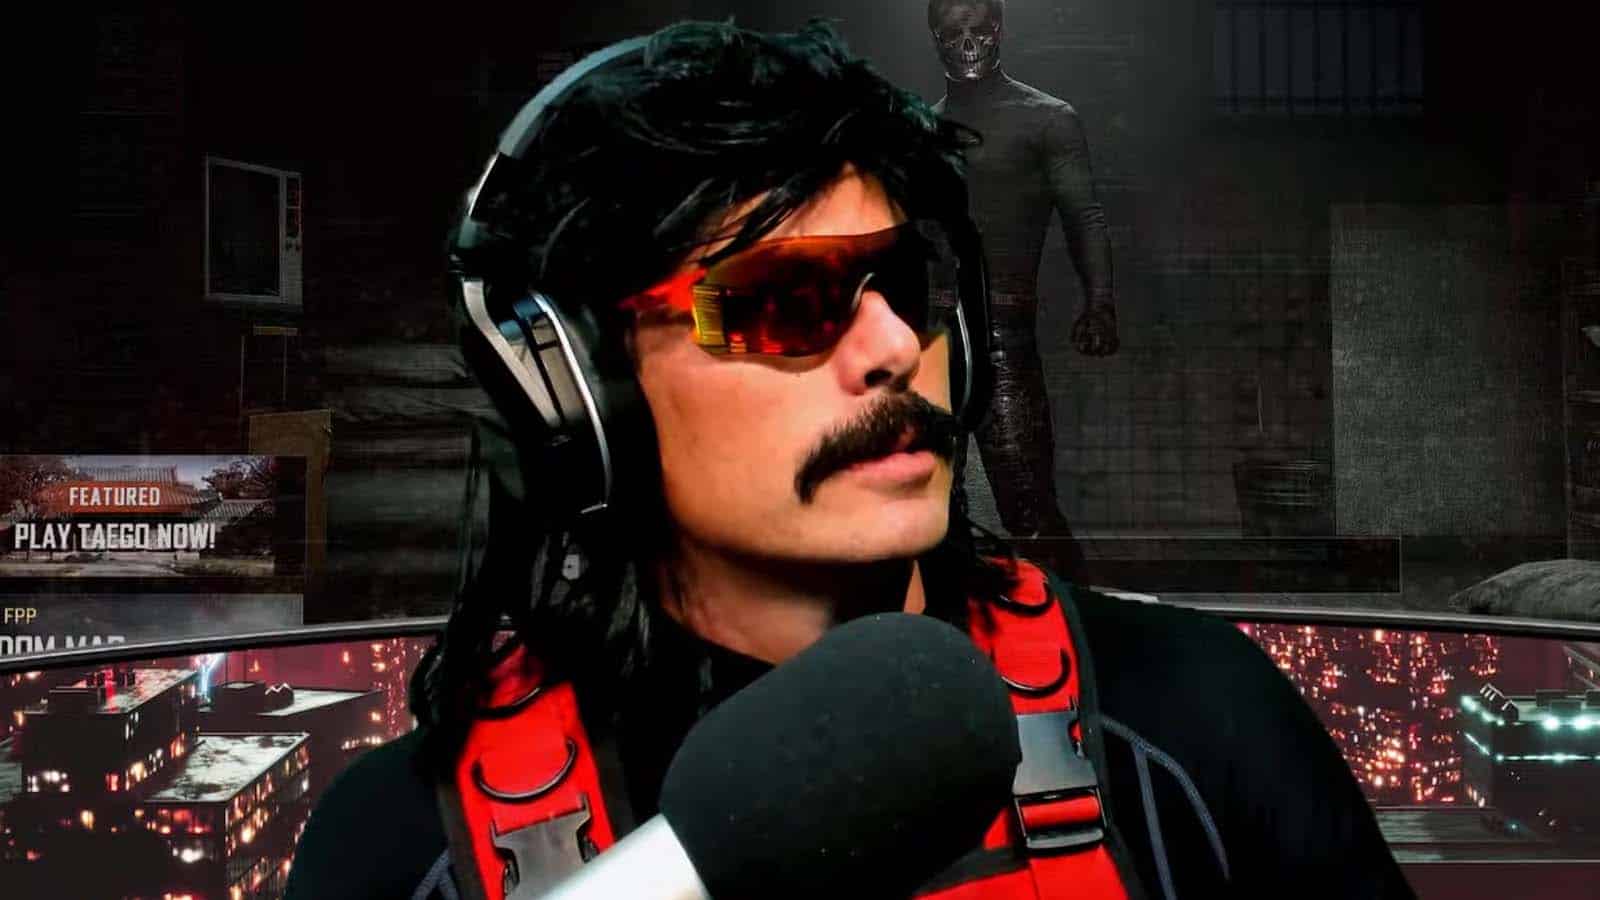 Dr Disrespect unloads on YouTube stream sniper in hilarious rant: "Go get a life!"